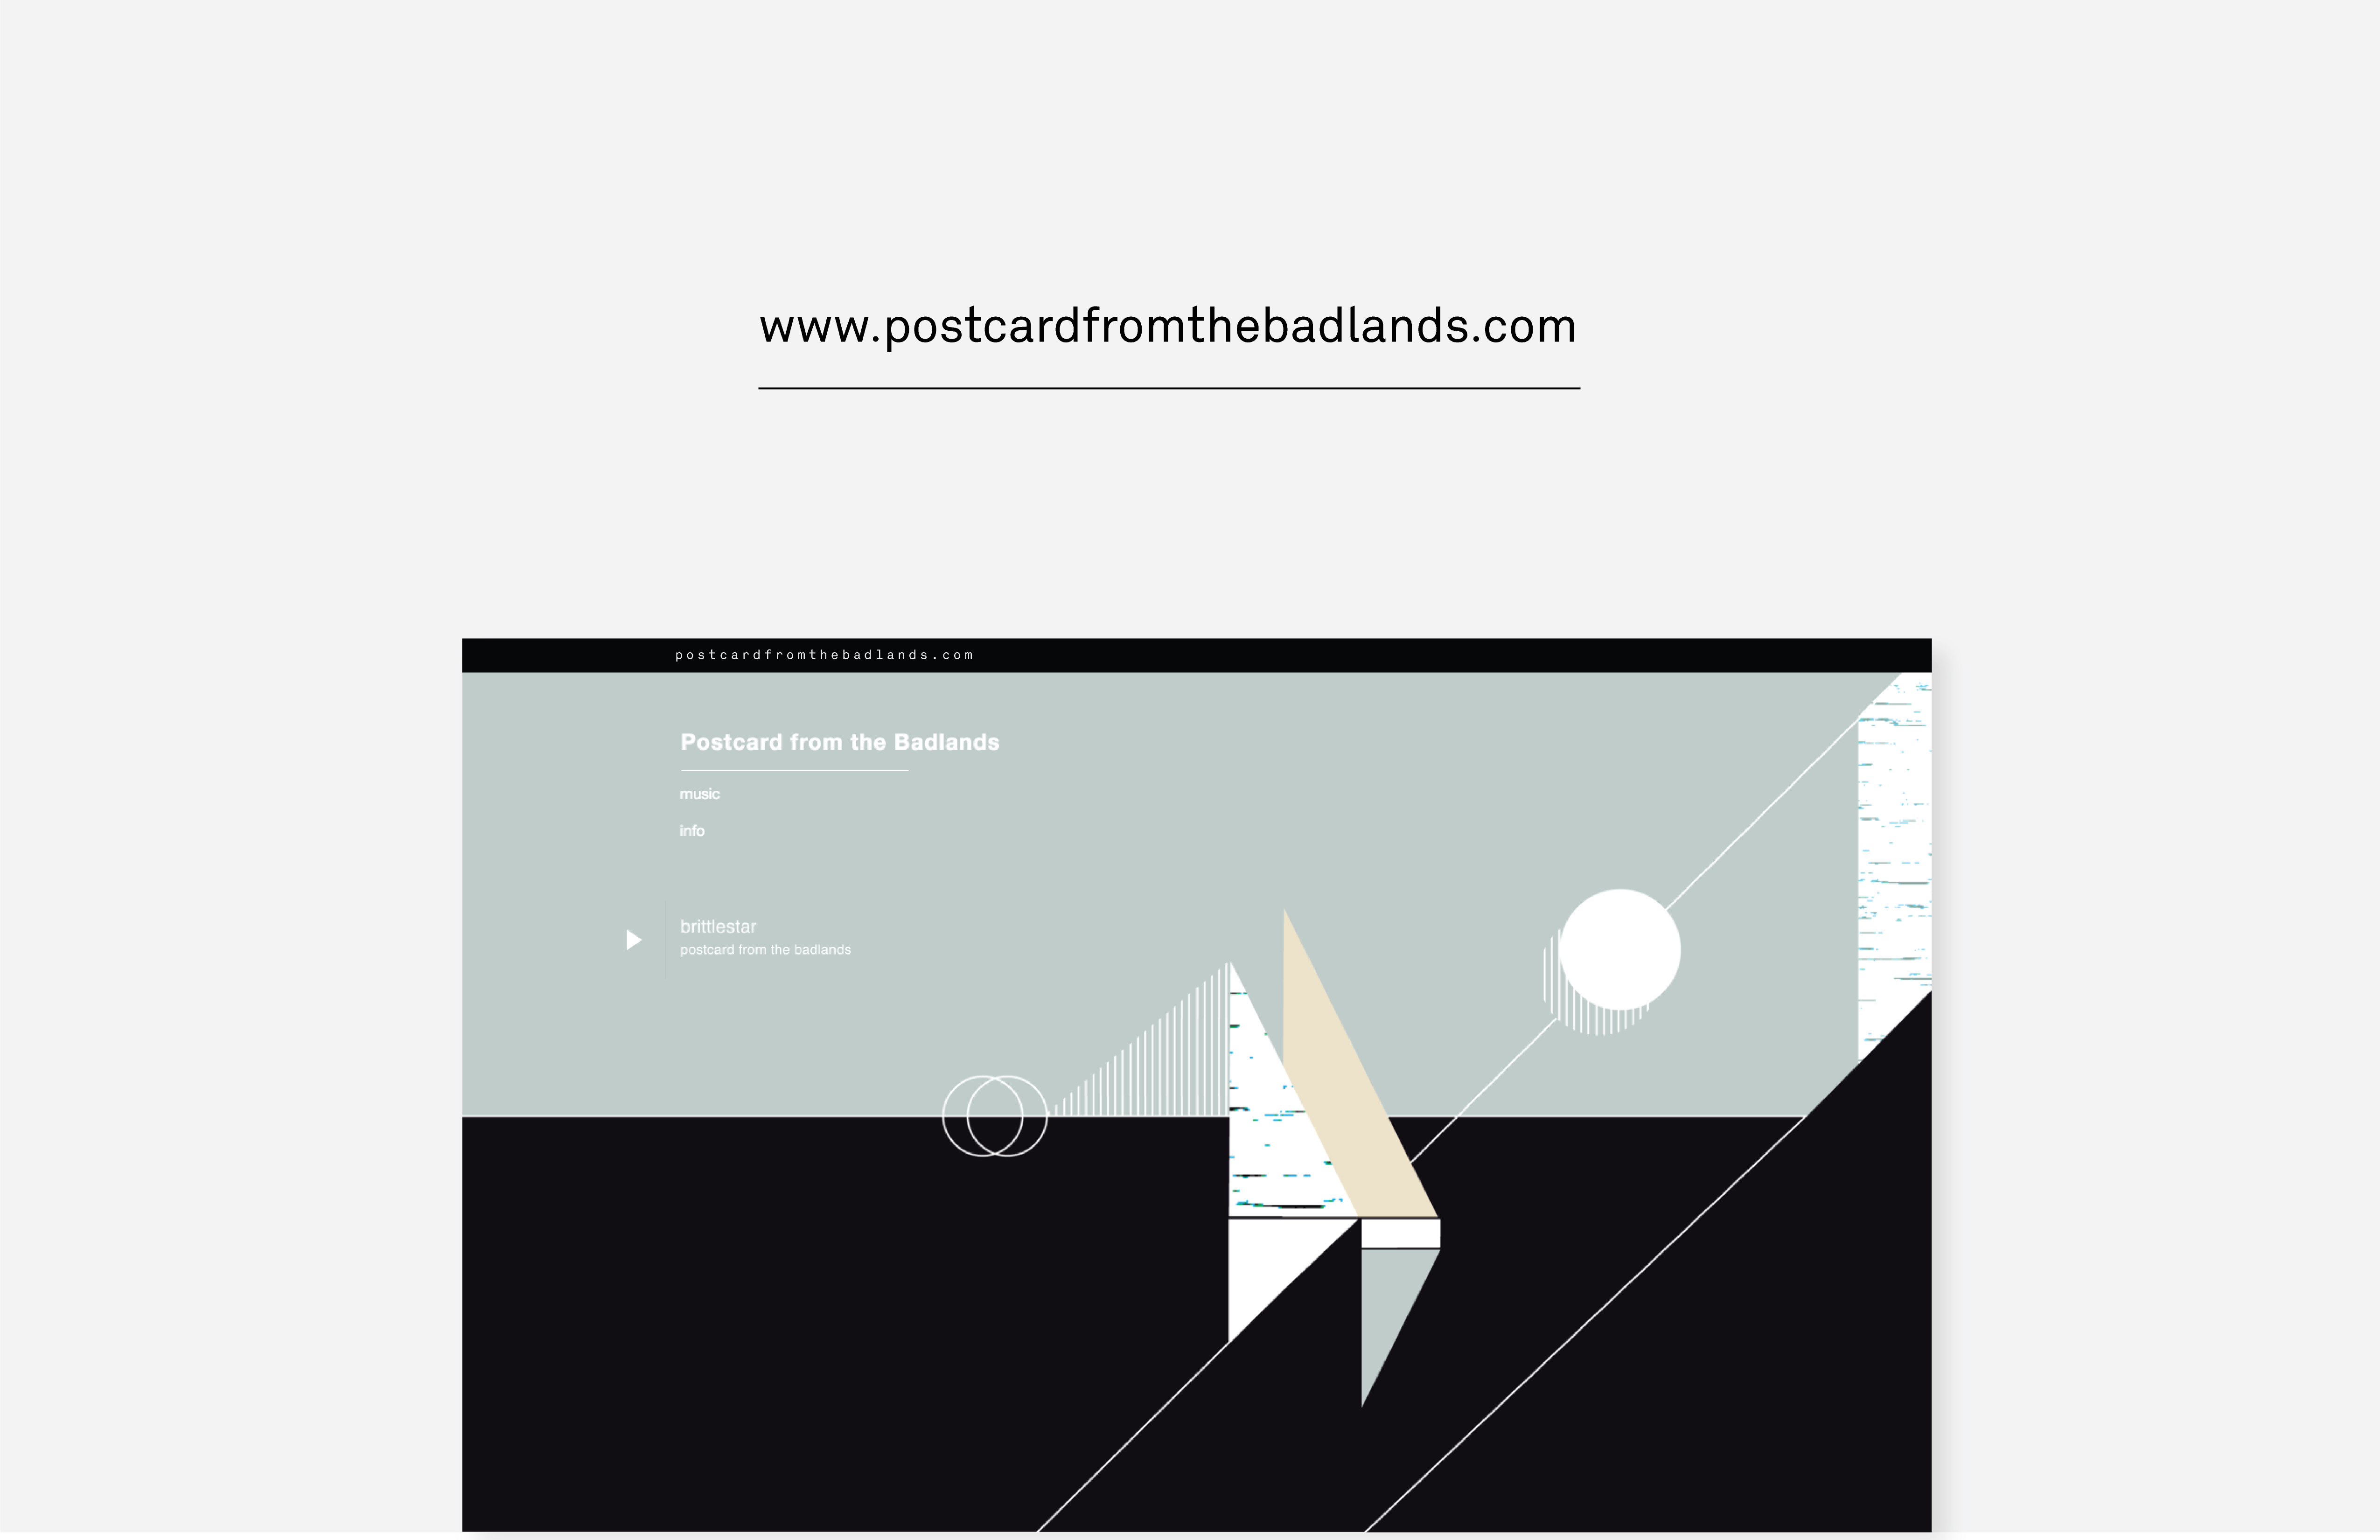 The website design for Postcard from the Badlands utilizes the idea of an audio tale filled with conflict, hope and resolution